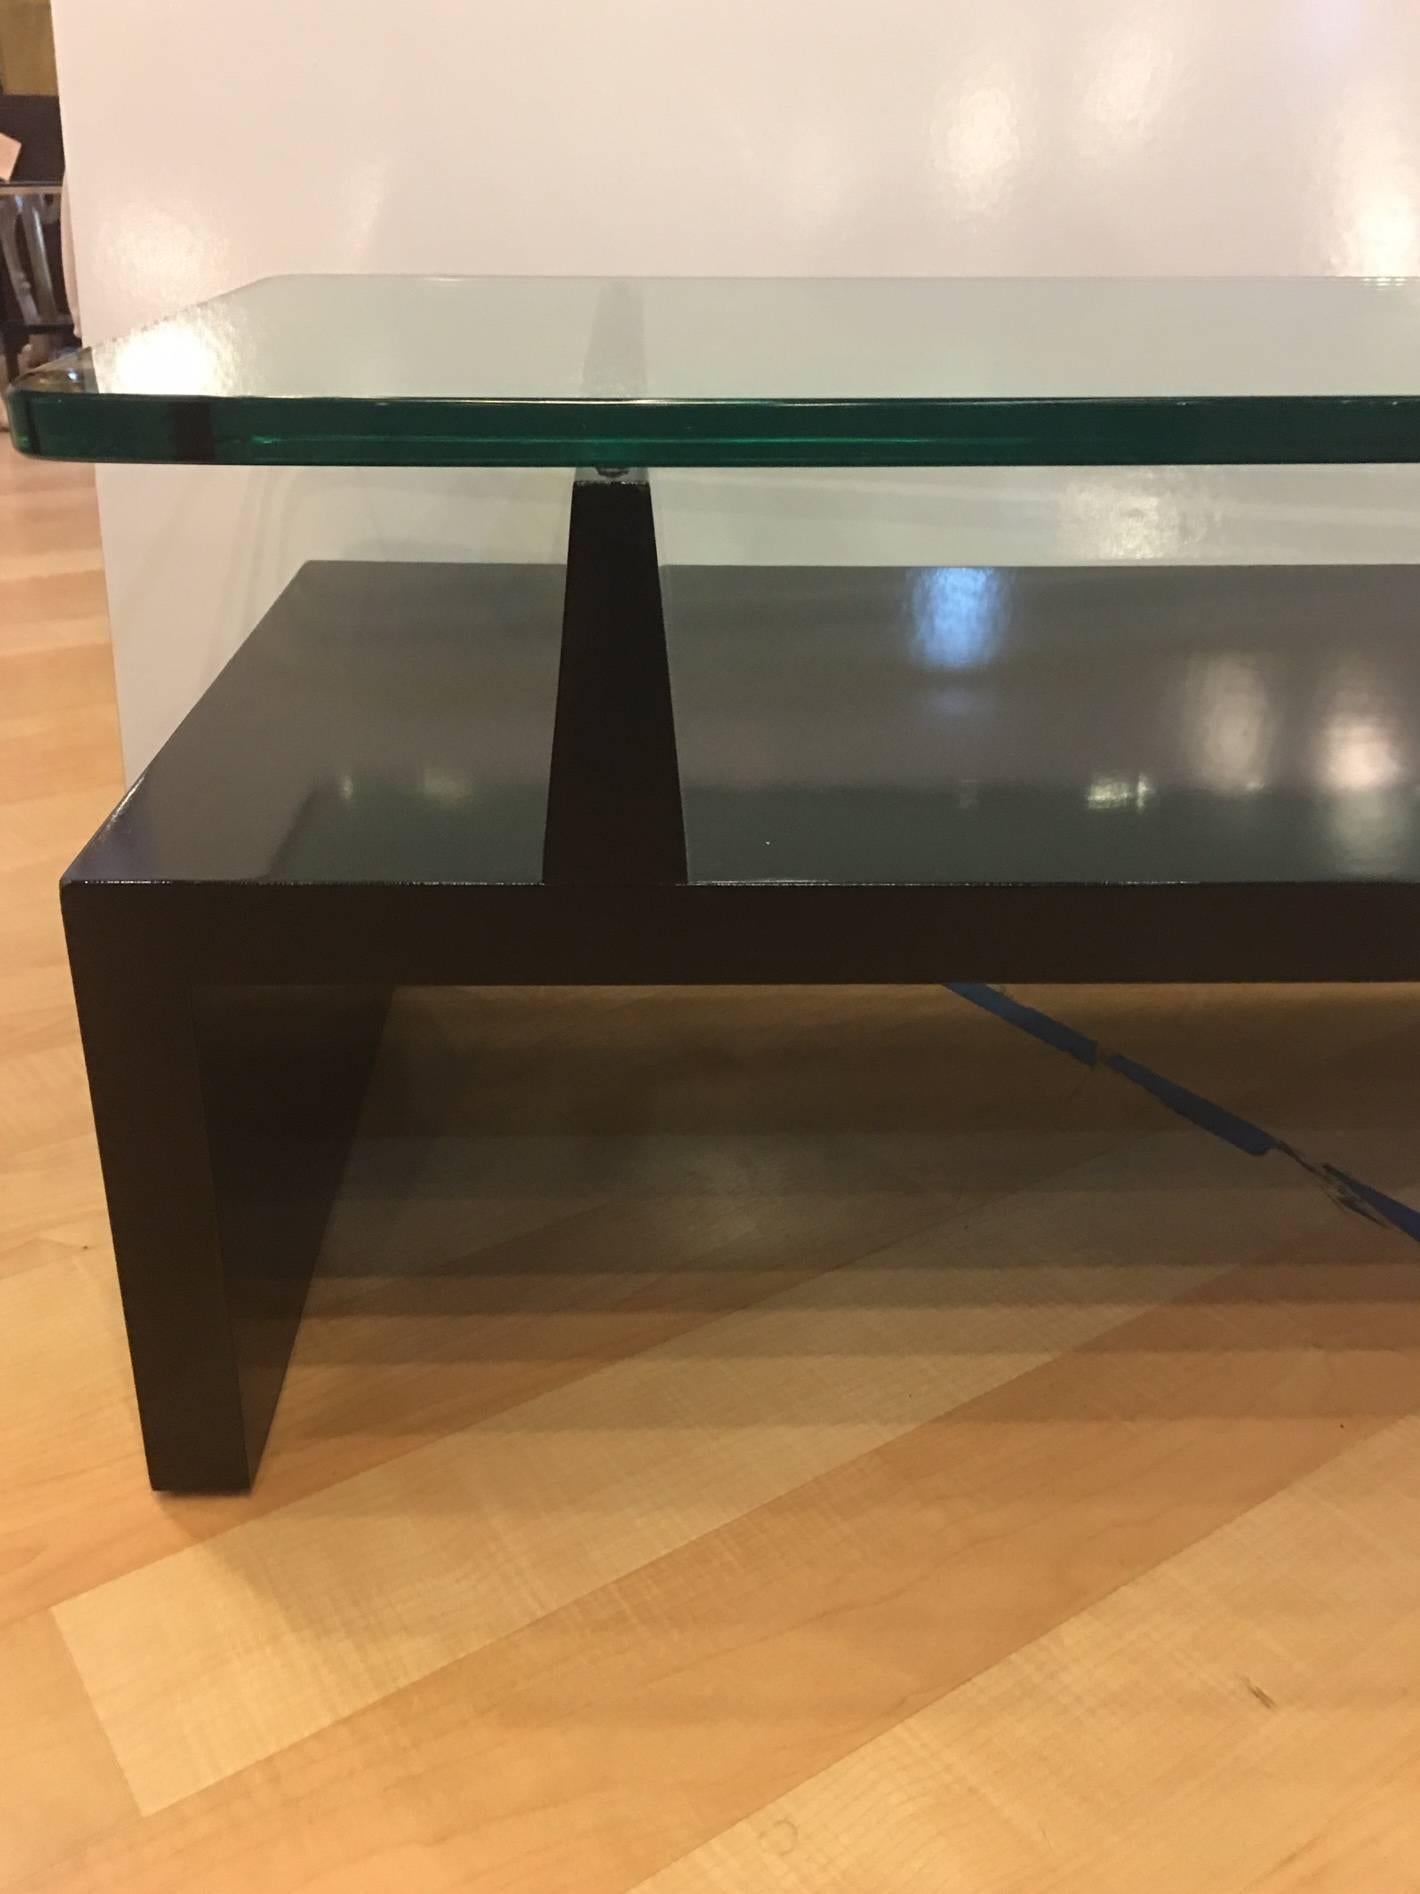 This is a signed piece by Tommi Parzinger for Parzinger originals and has been recently lacquered gloss black. It is in excellent condition with an incredible deep glass top with rounded edges. The glass is nearly an inch thick. A beautiful piece.